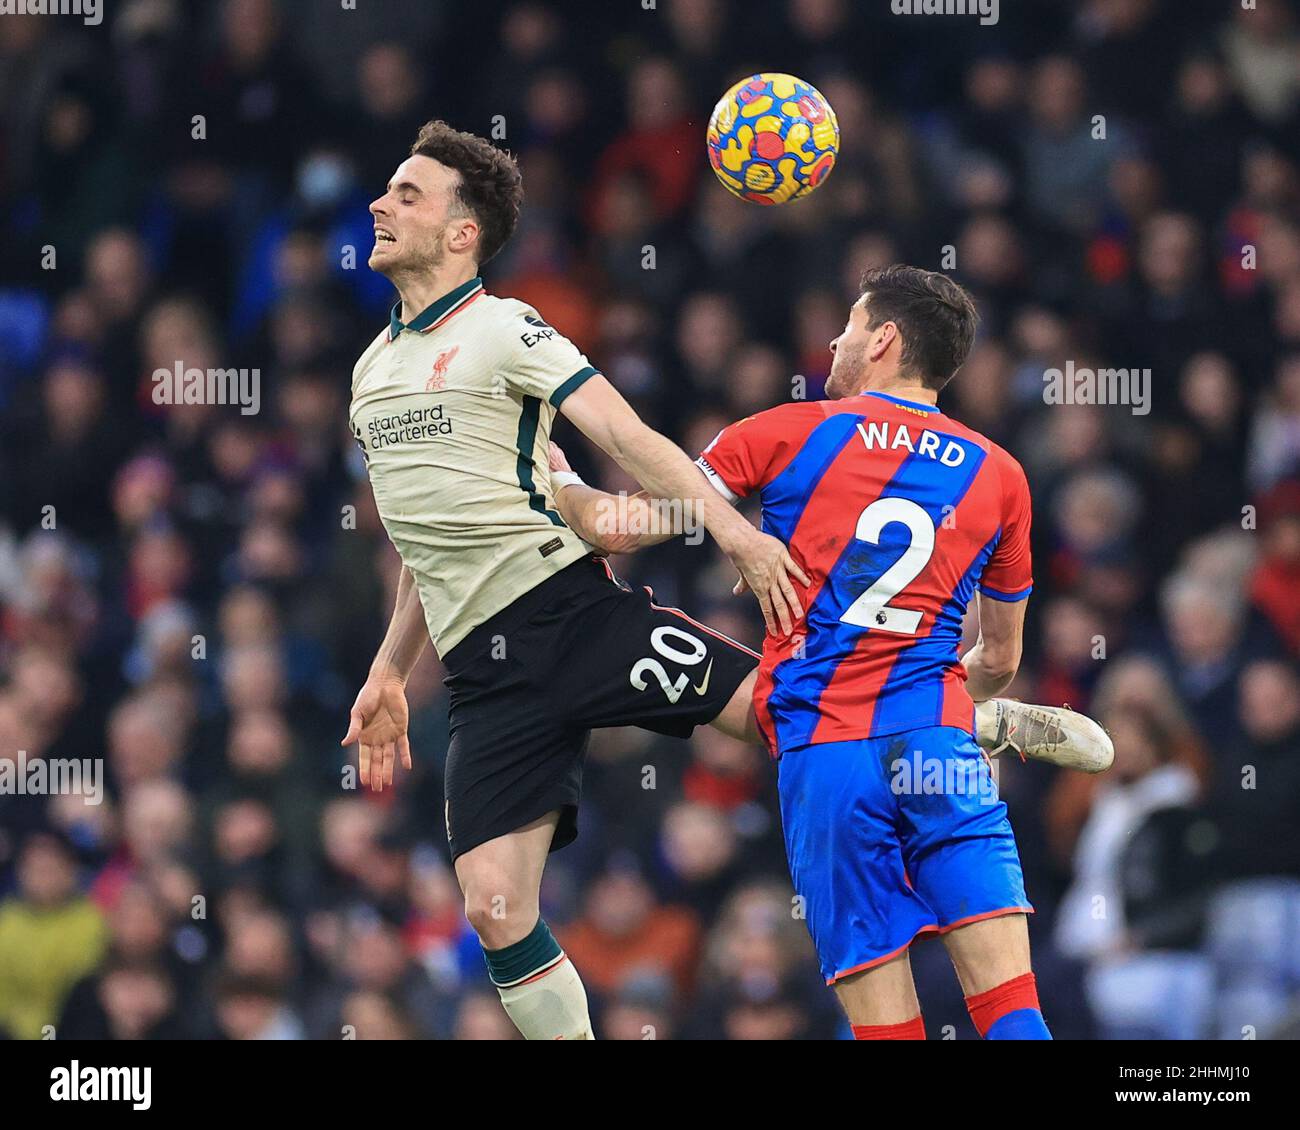 Diogo Jota #20 of Liverpool and Joel Ward #2 of Crystal Palace battle for the ball Stock Photo